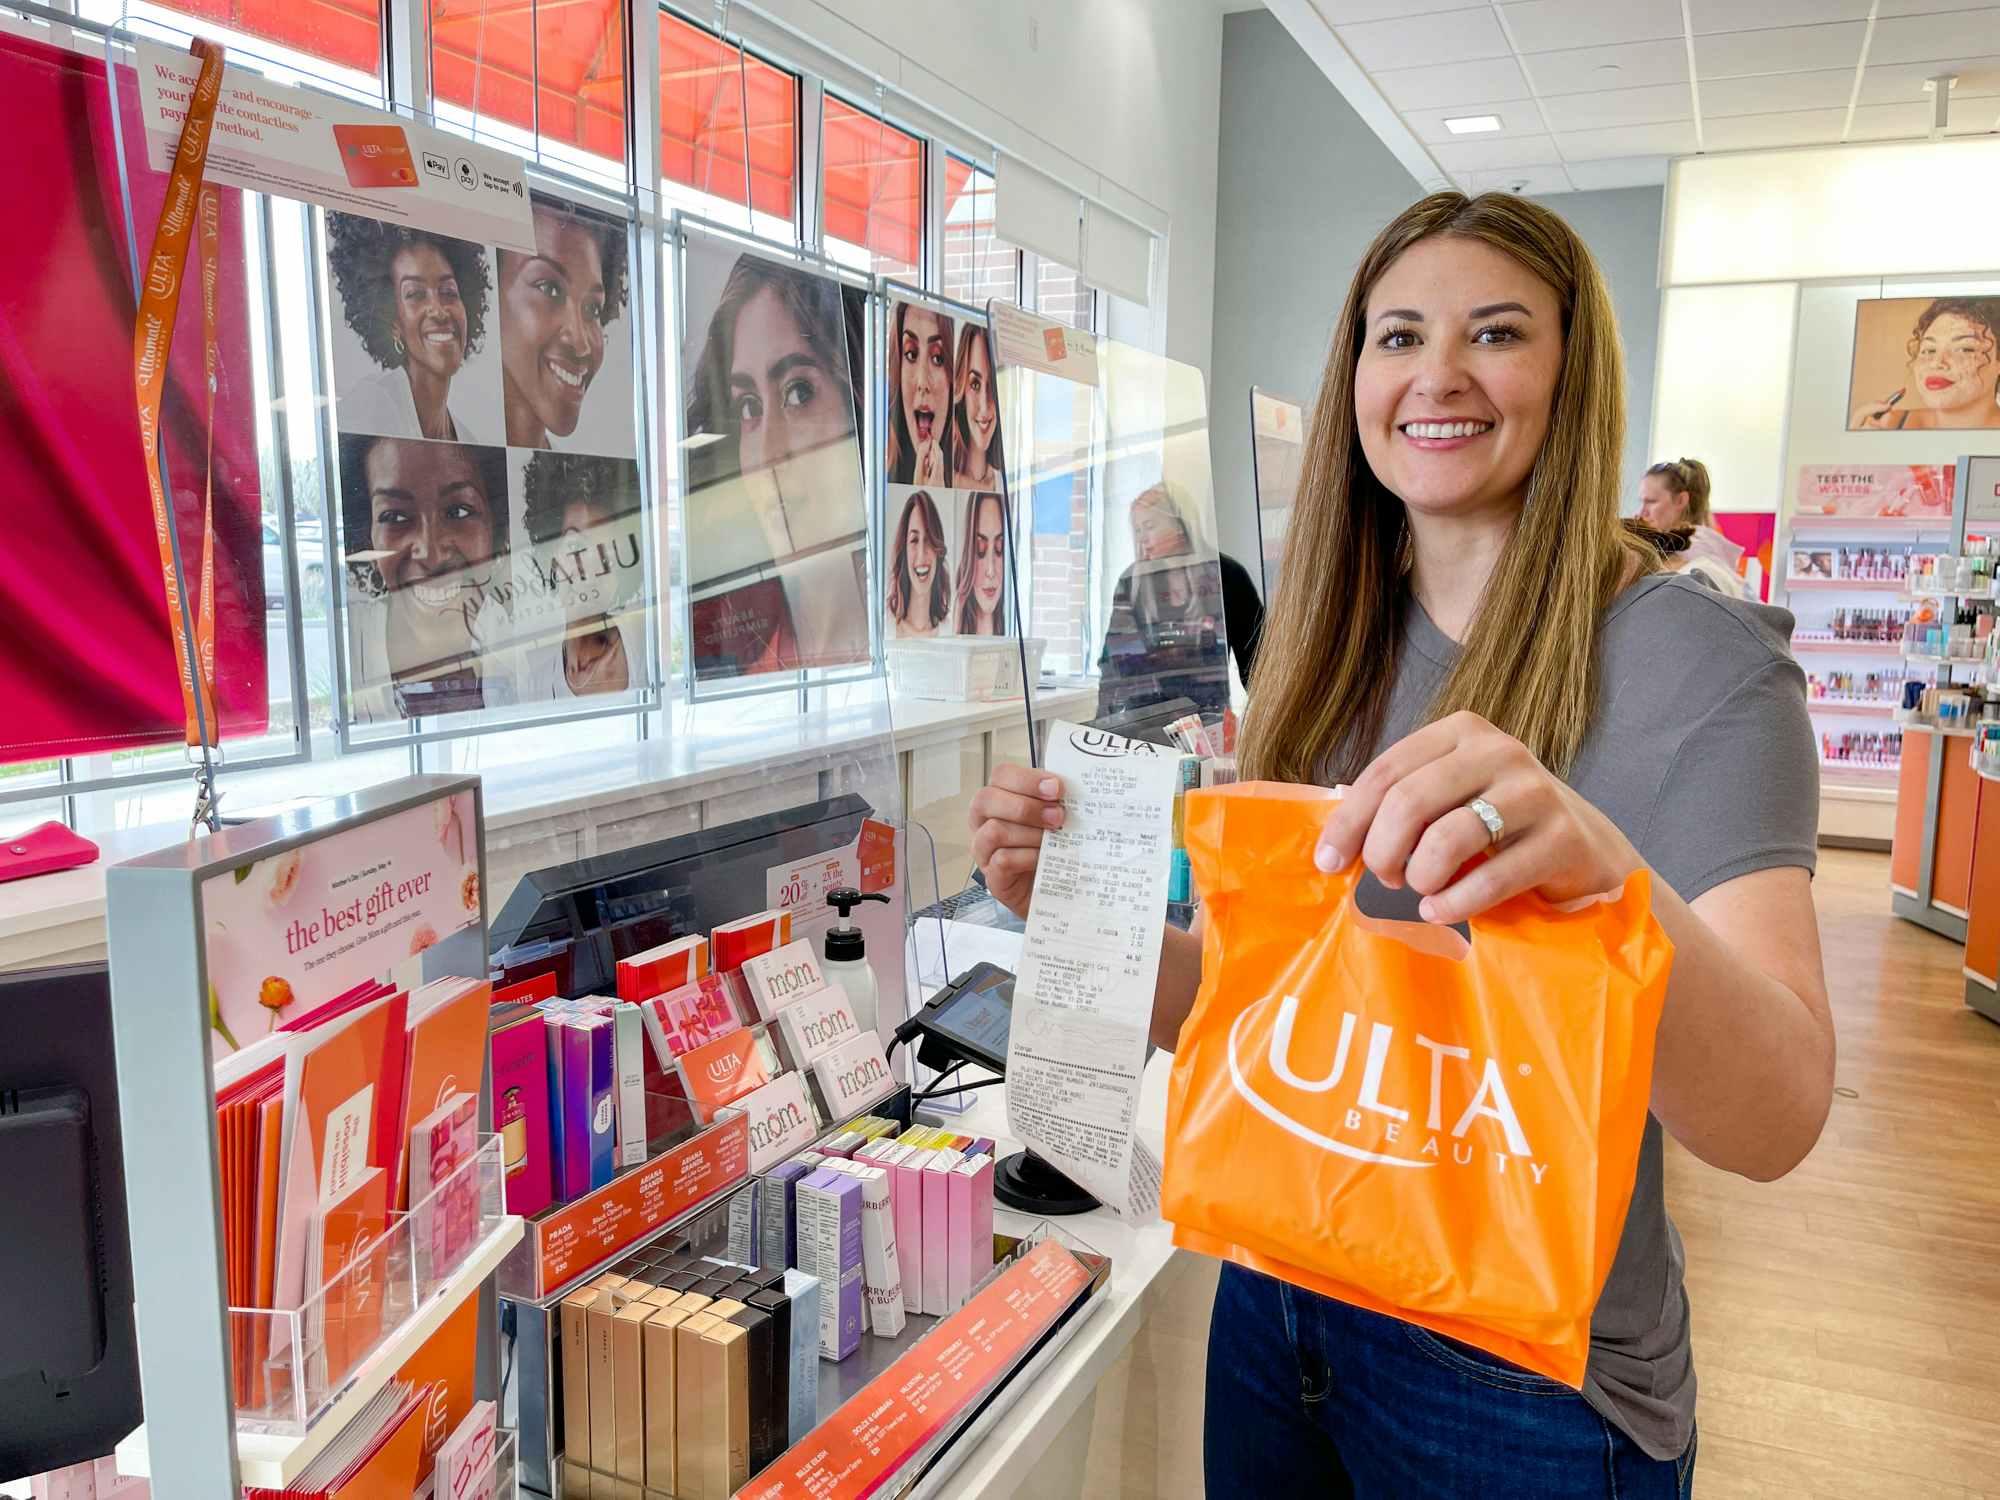 A person holding up a bag of items purchased and receipt from Ulta inside of an Ulta store